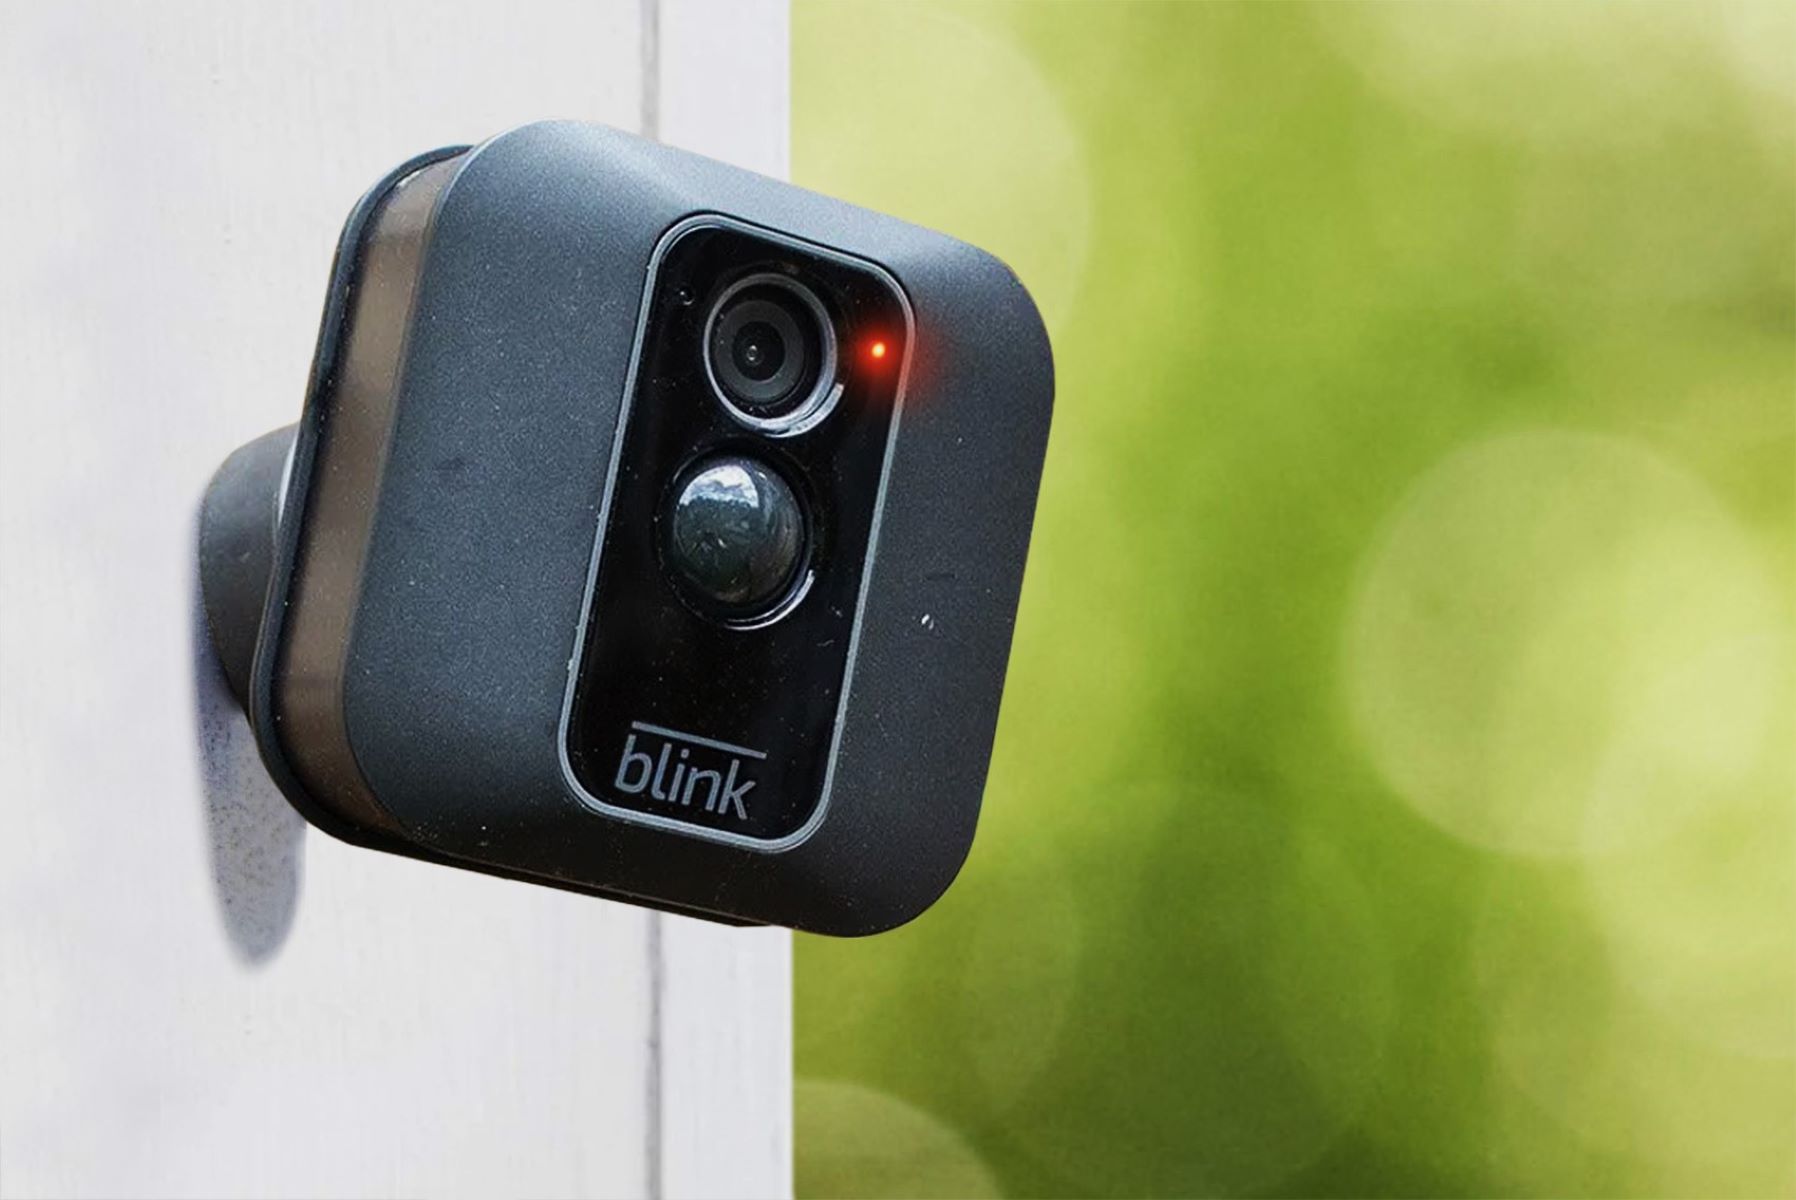 What Is The Latest Blink Outdoor Camera